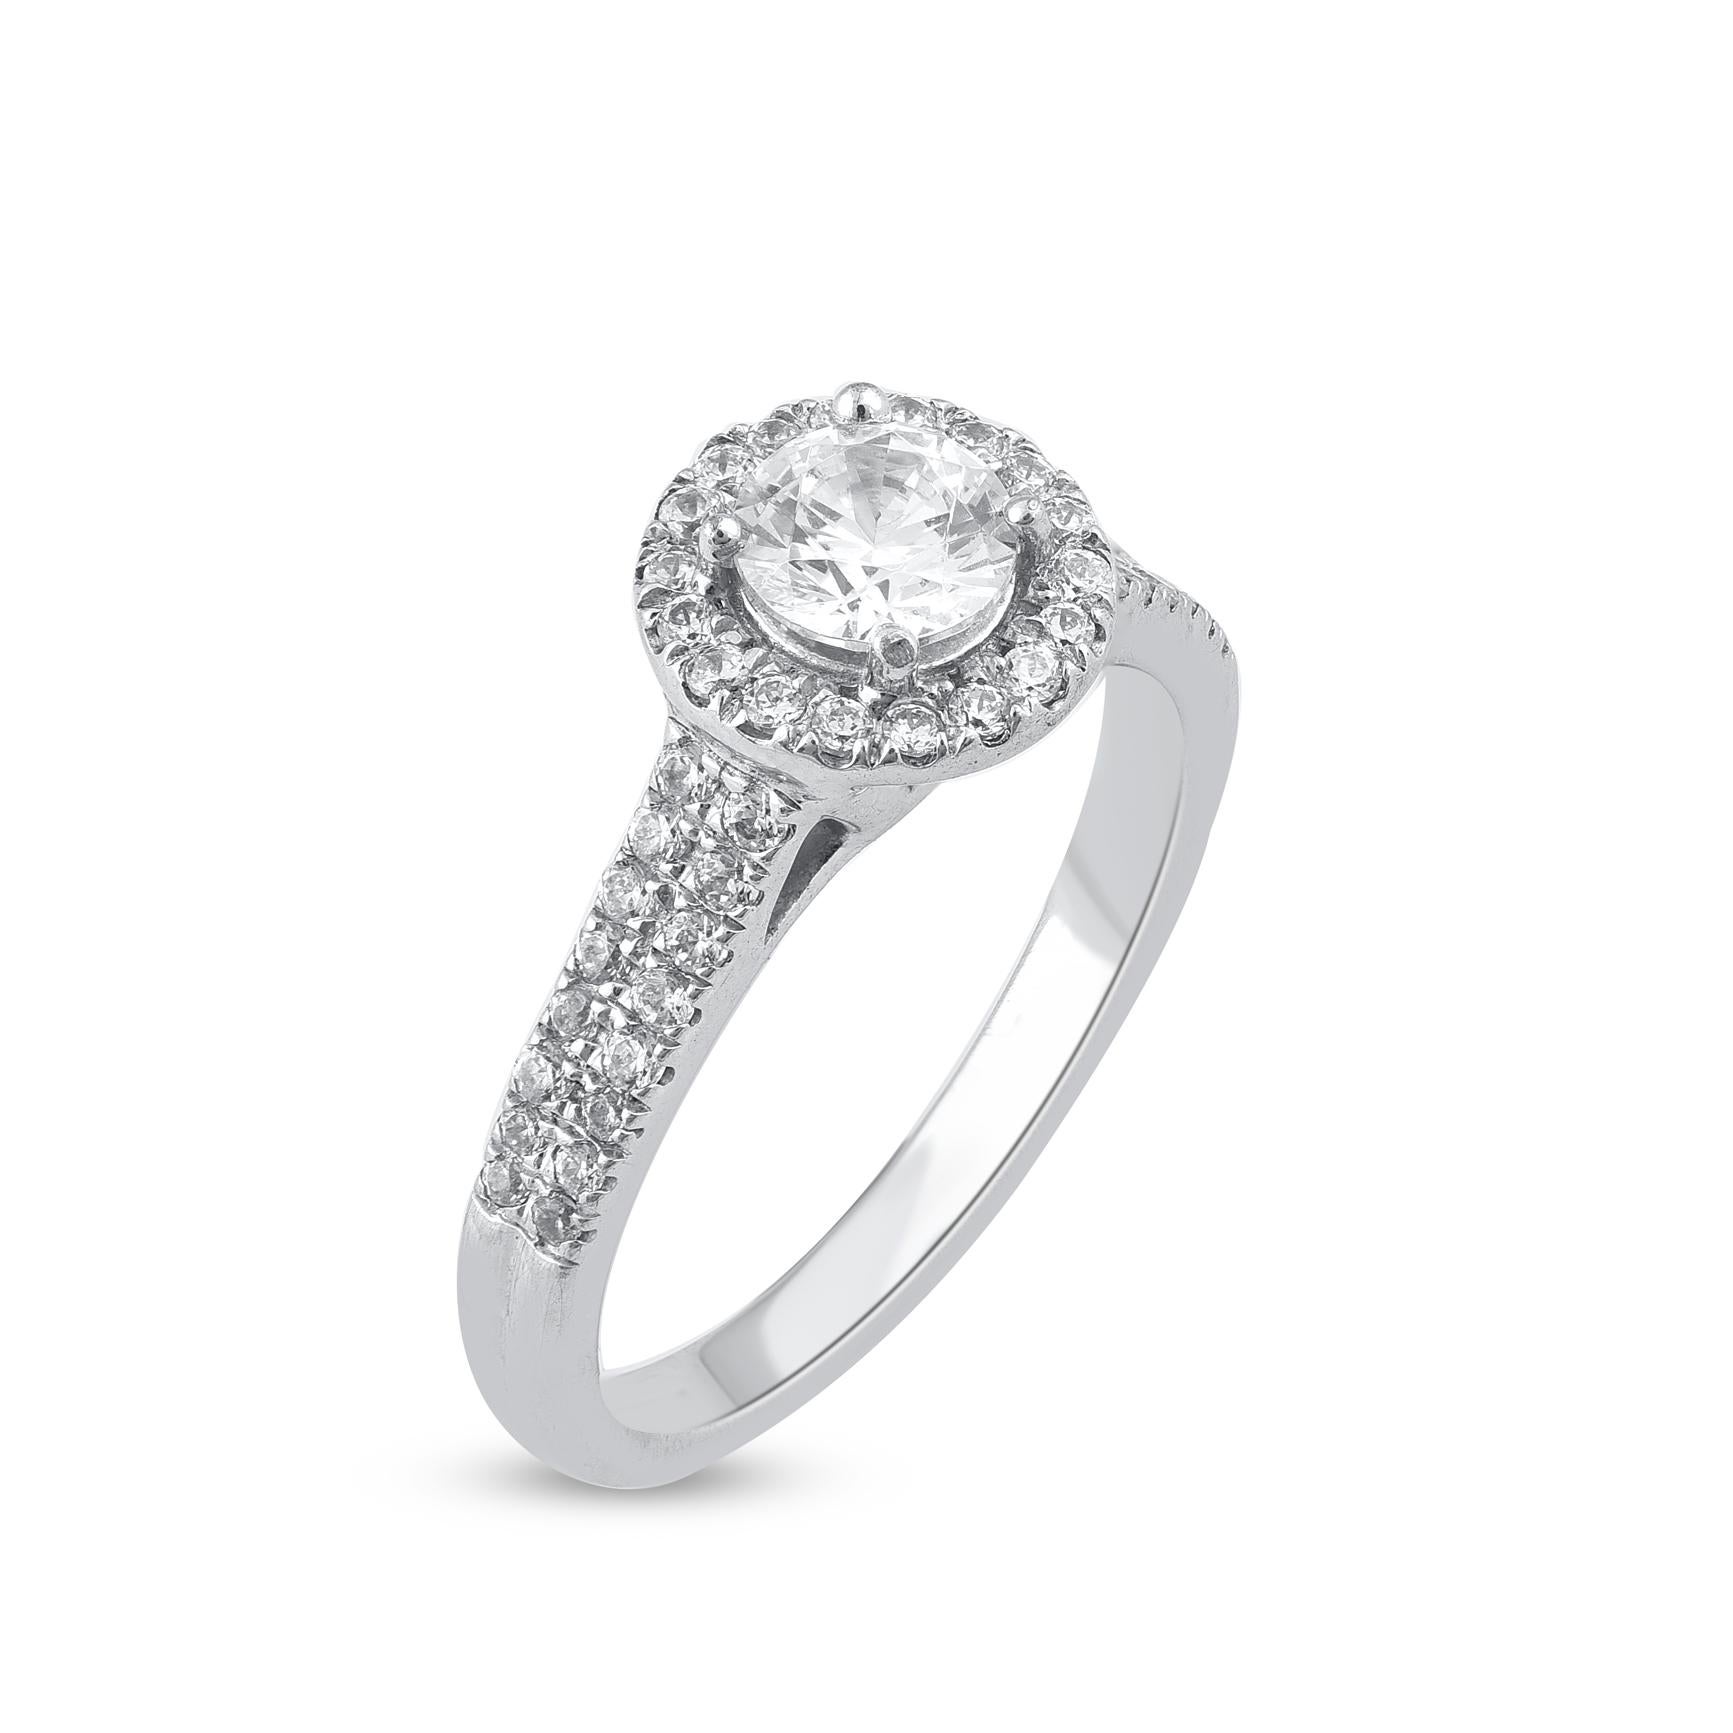 Contemporary TJD 1.0 Carat Brilliant Cut Round Diamond 14KT White Gold Halo Engagement Ring For Sale